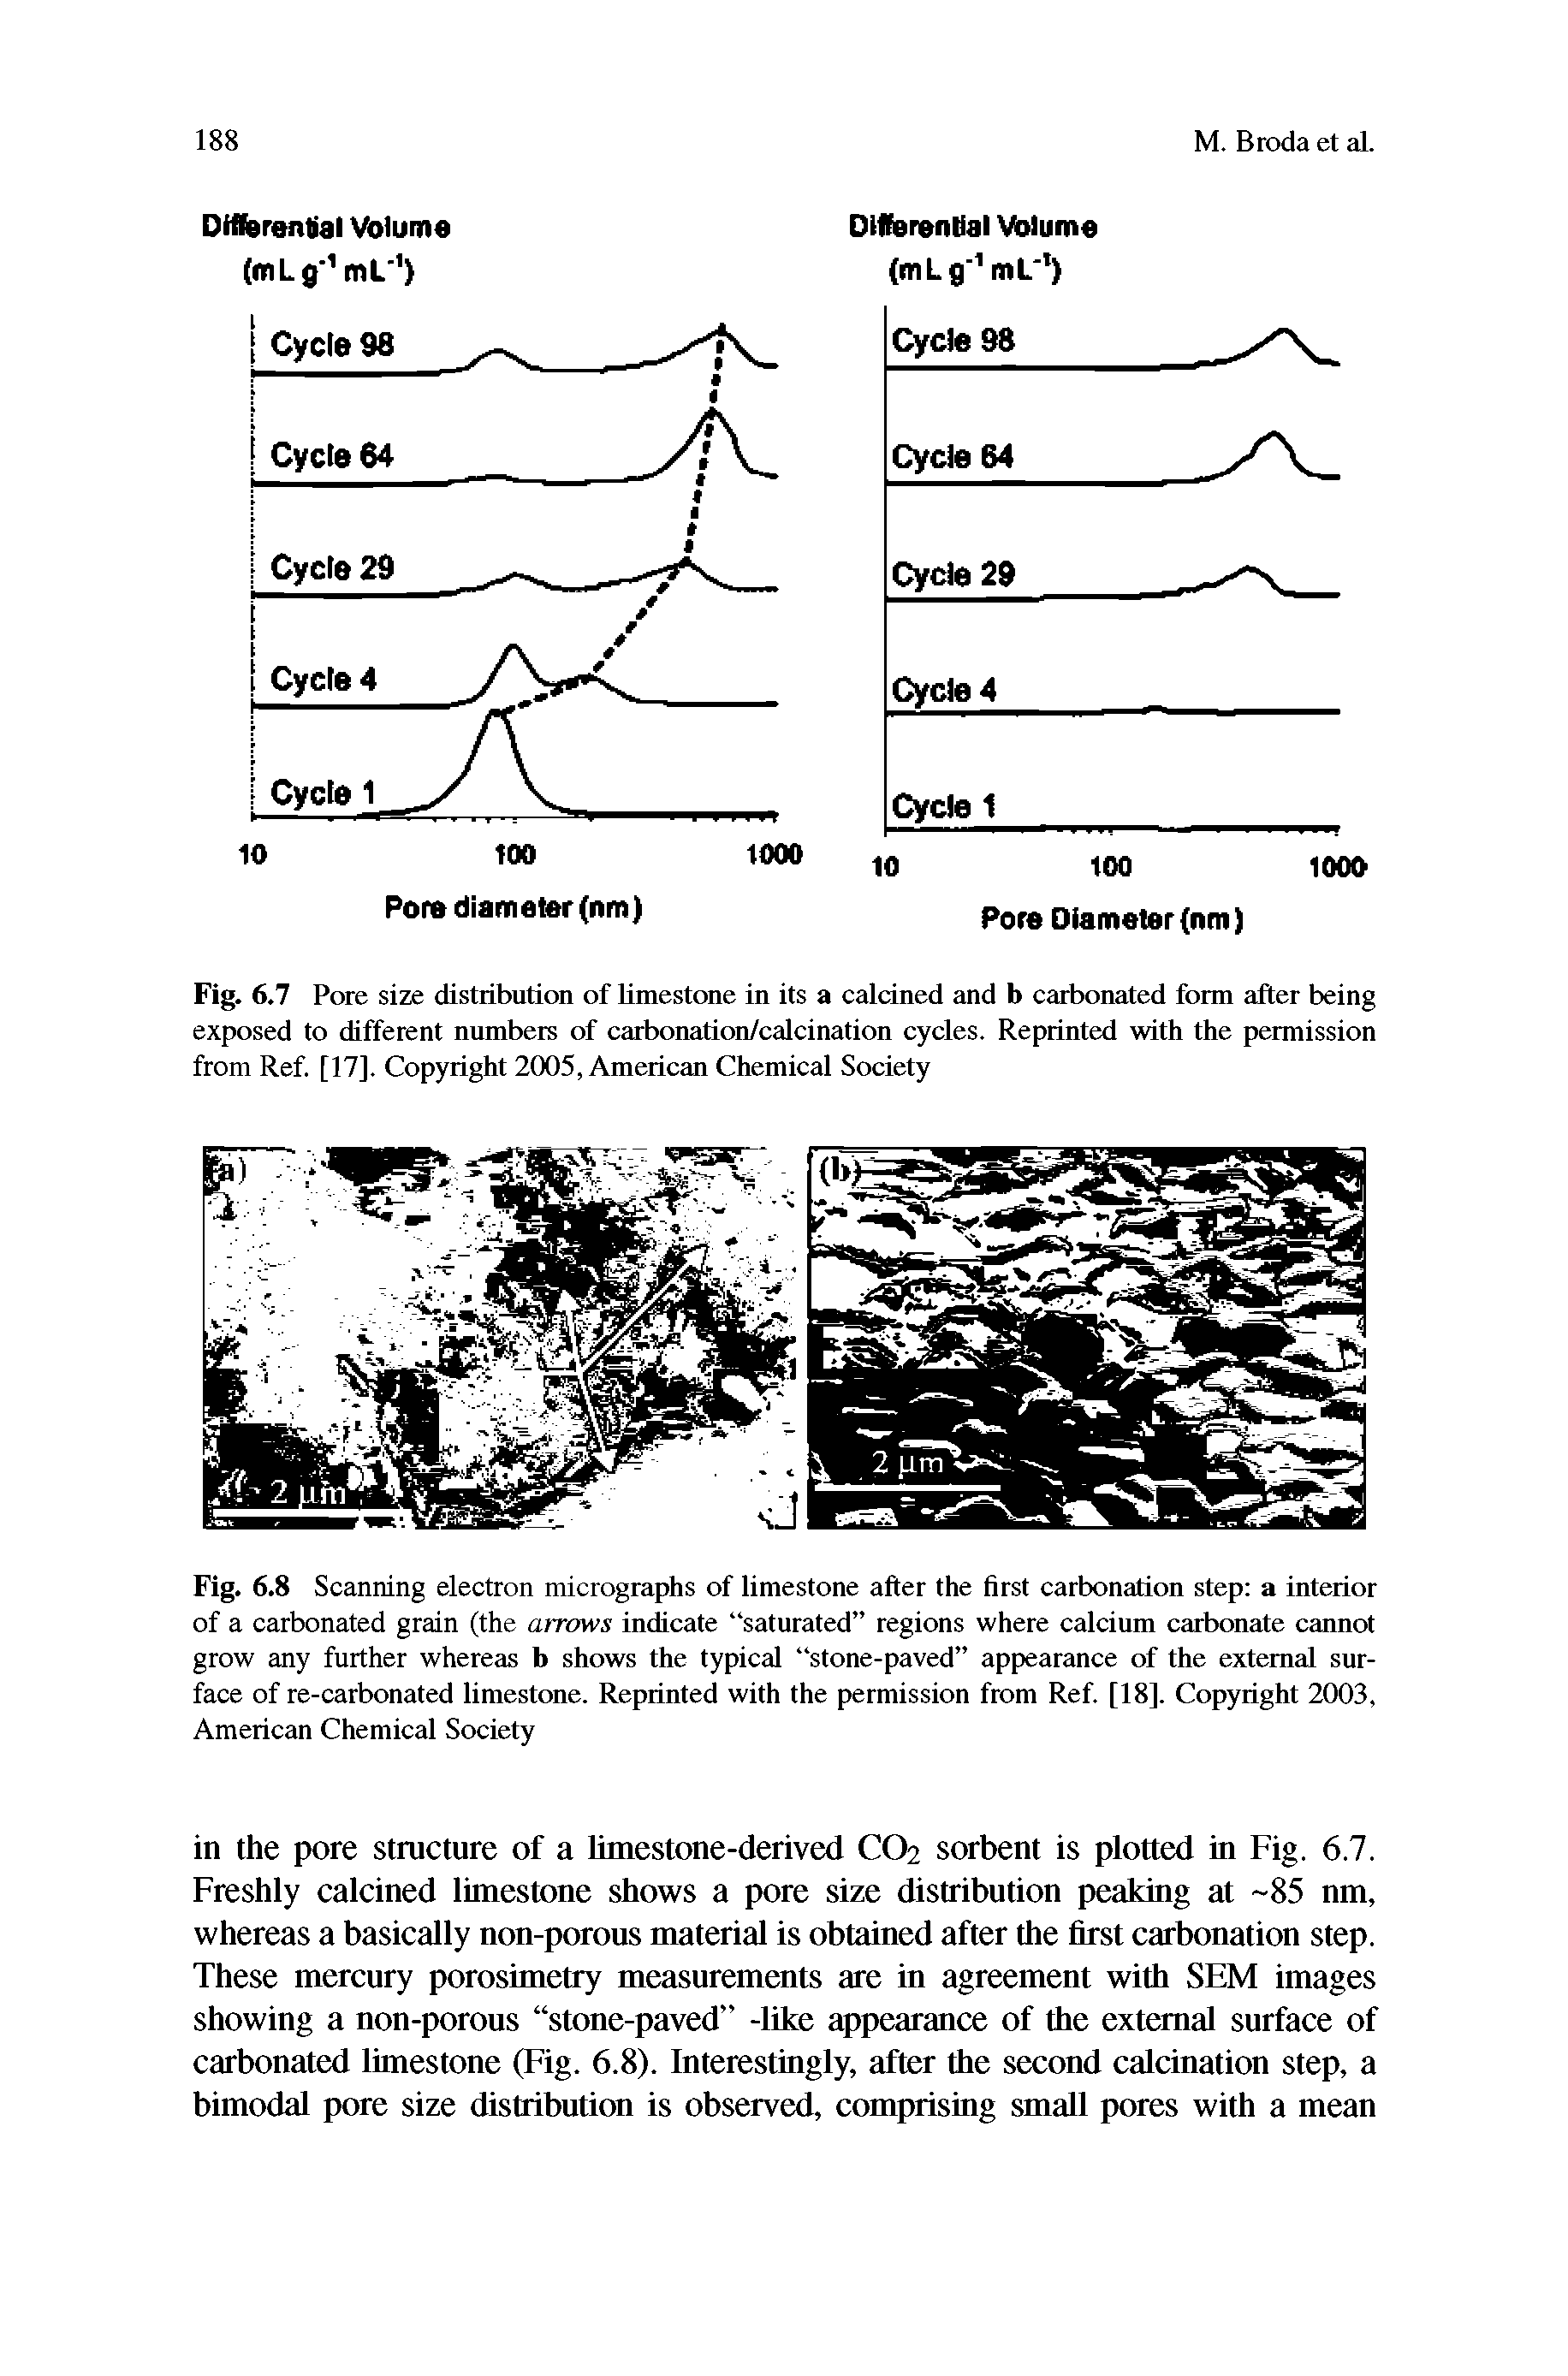 Fig. 6.7 Pore size distribution of limestone in its a calcined and b carbonated form after being exposed to different numbers of carbonation/calcination cycles. Reprinted with the permission from Ref. [17]. Copyright 2005, American Chemical Society...